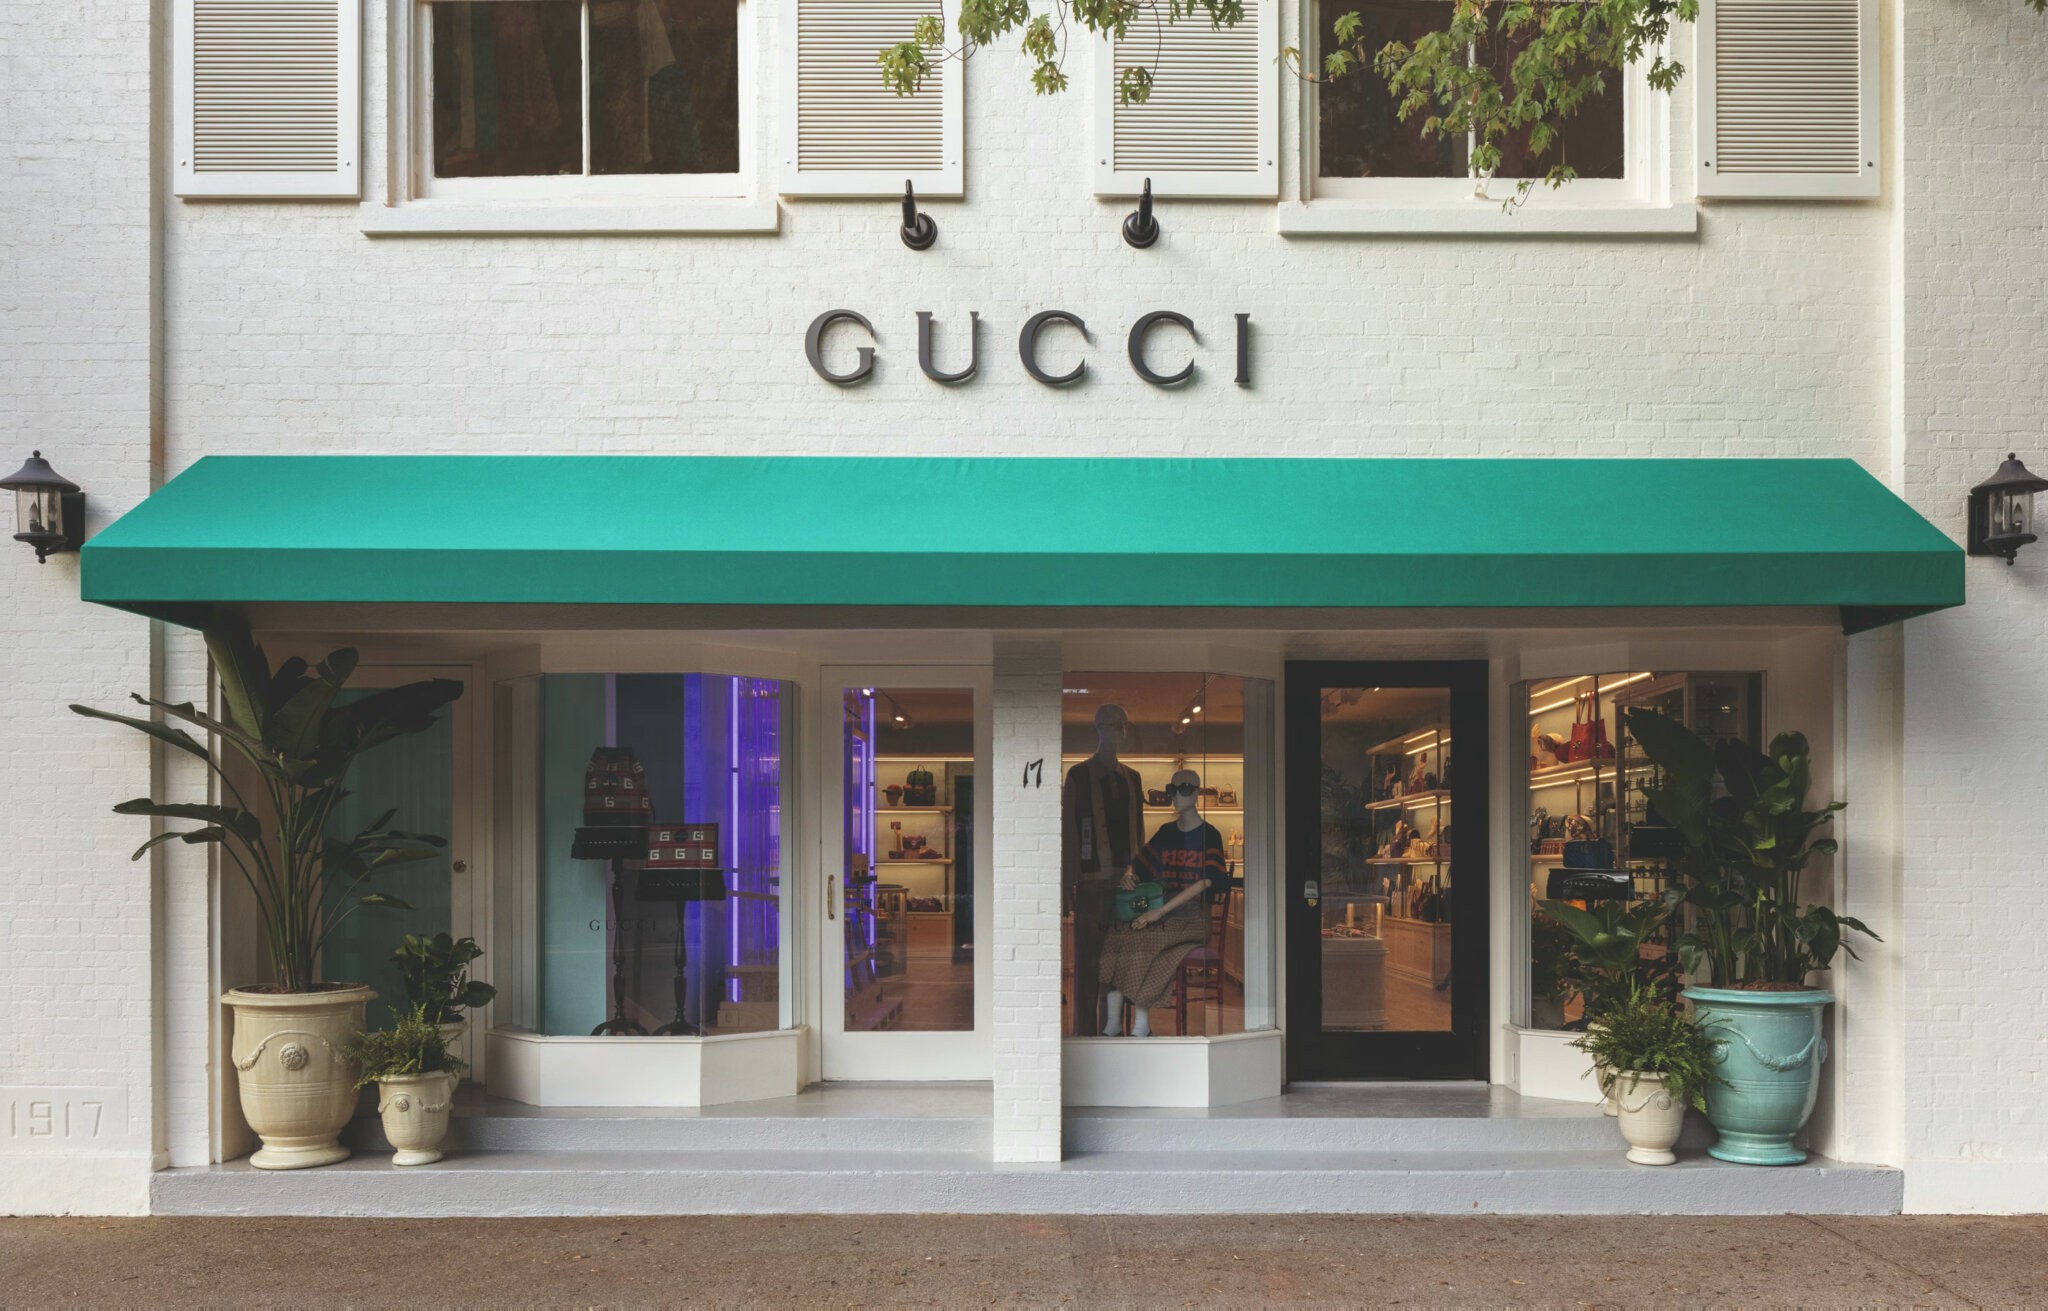 Gucci was one of the East Hampton stores that participated in the Spread the Love event.